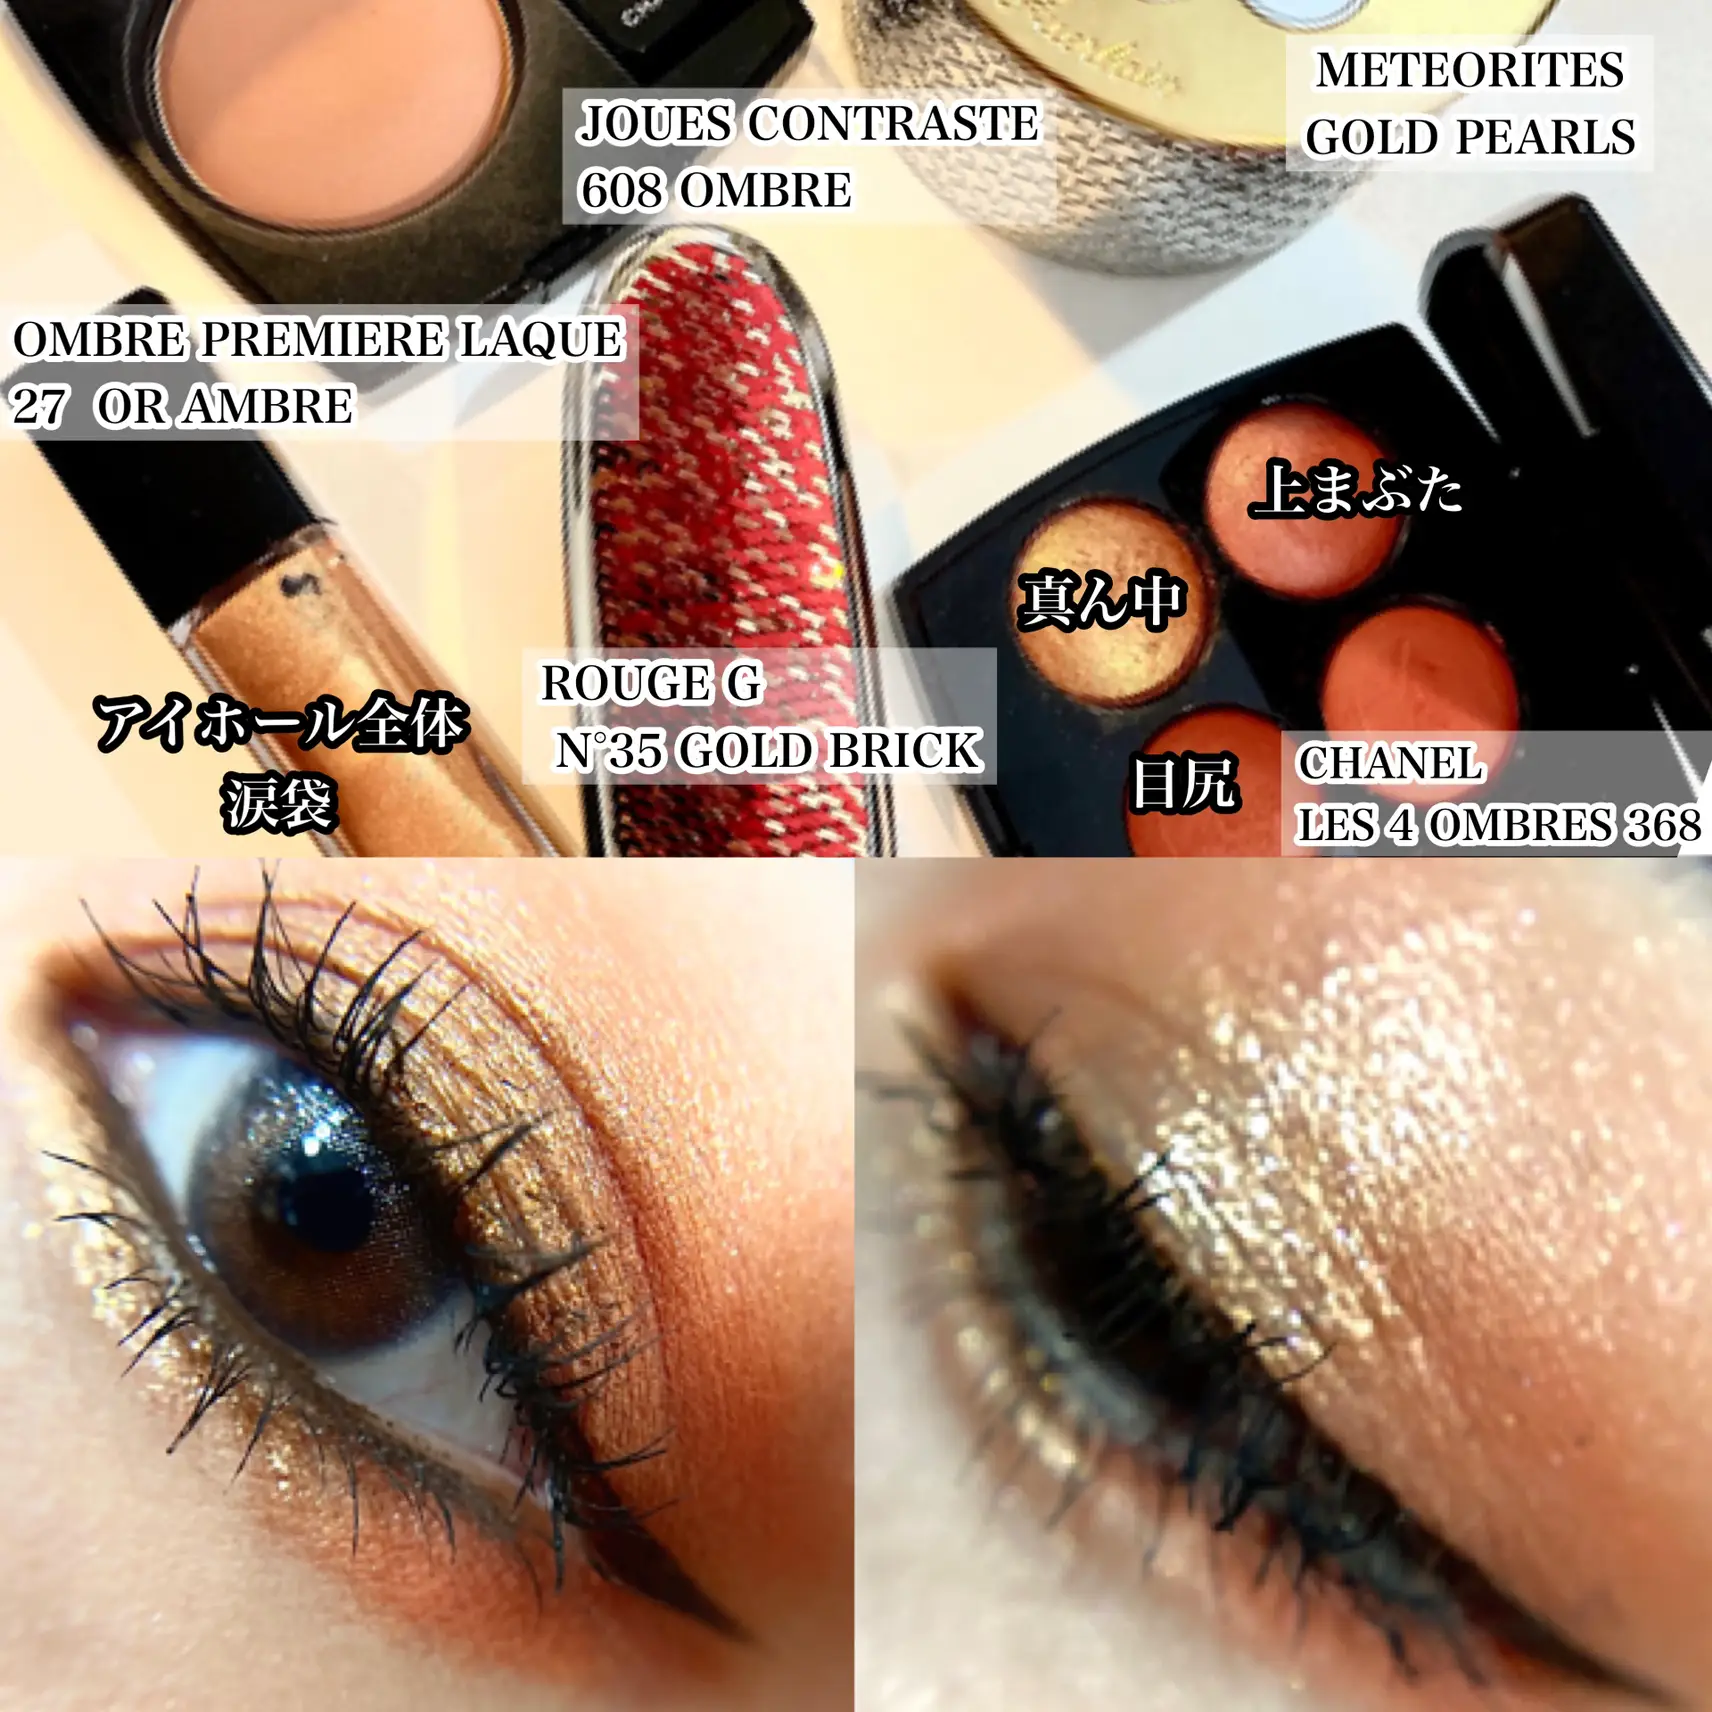 New Year makeup | Gallery posted by chamaru222 | Lemon8